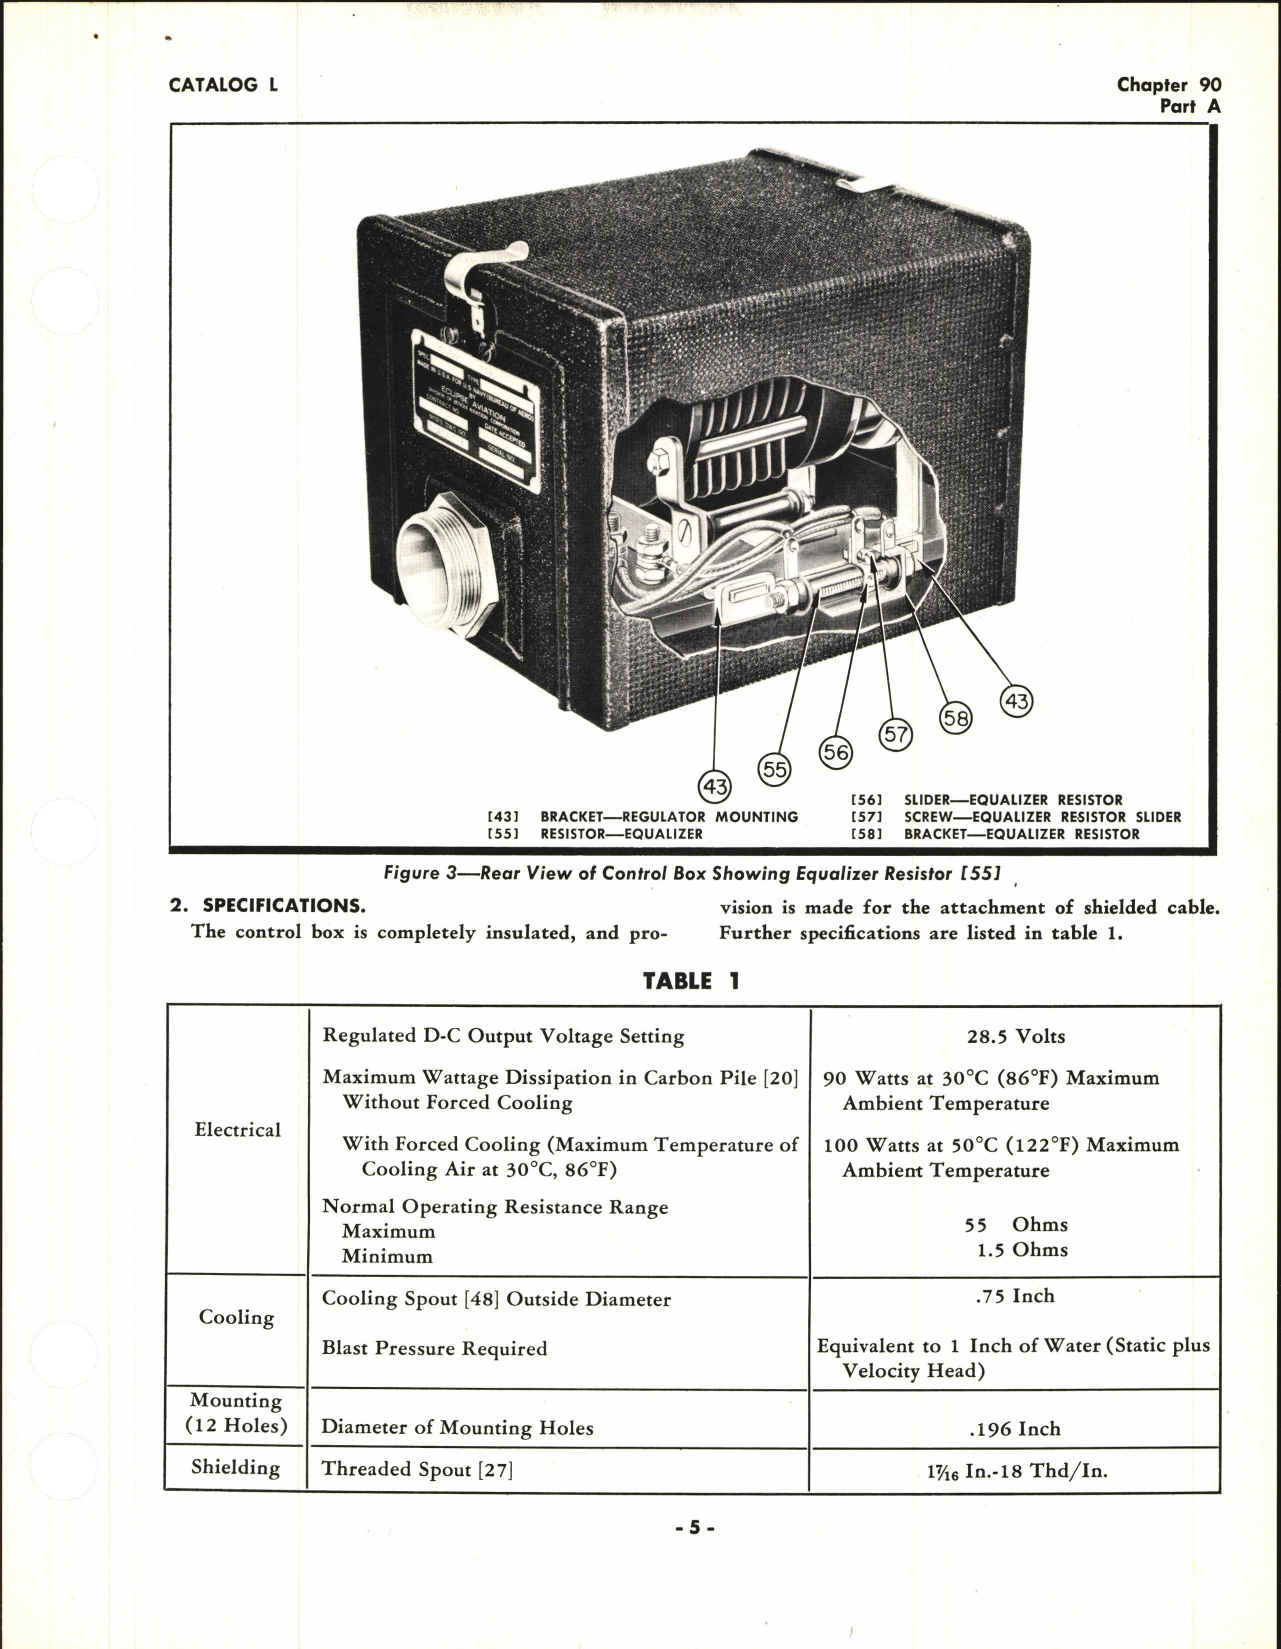 Sample page 5 from AirCorps Library document: Operating and Service Instructions for D-C Carbon Pile Voltage Regulator Control Box Type 1305, Model 1